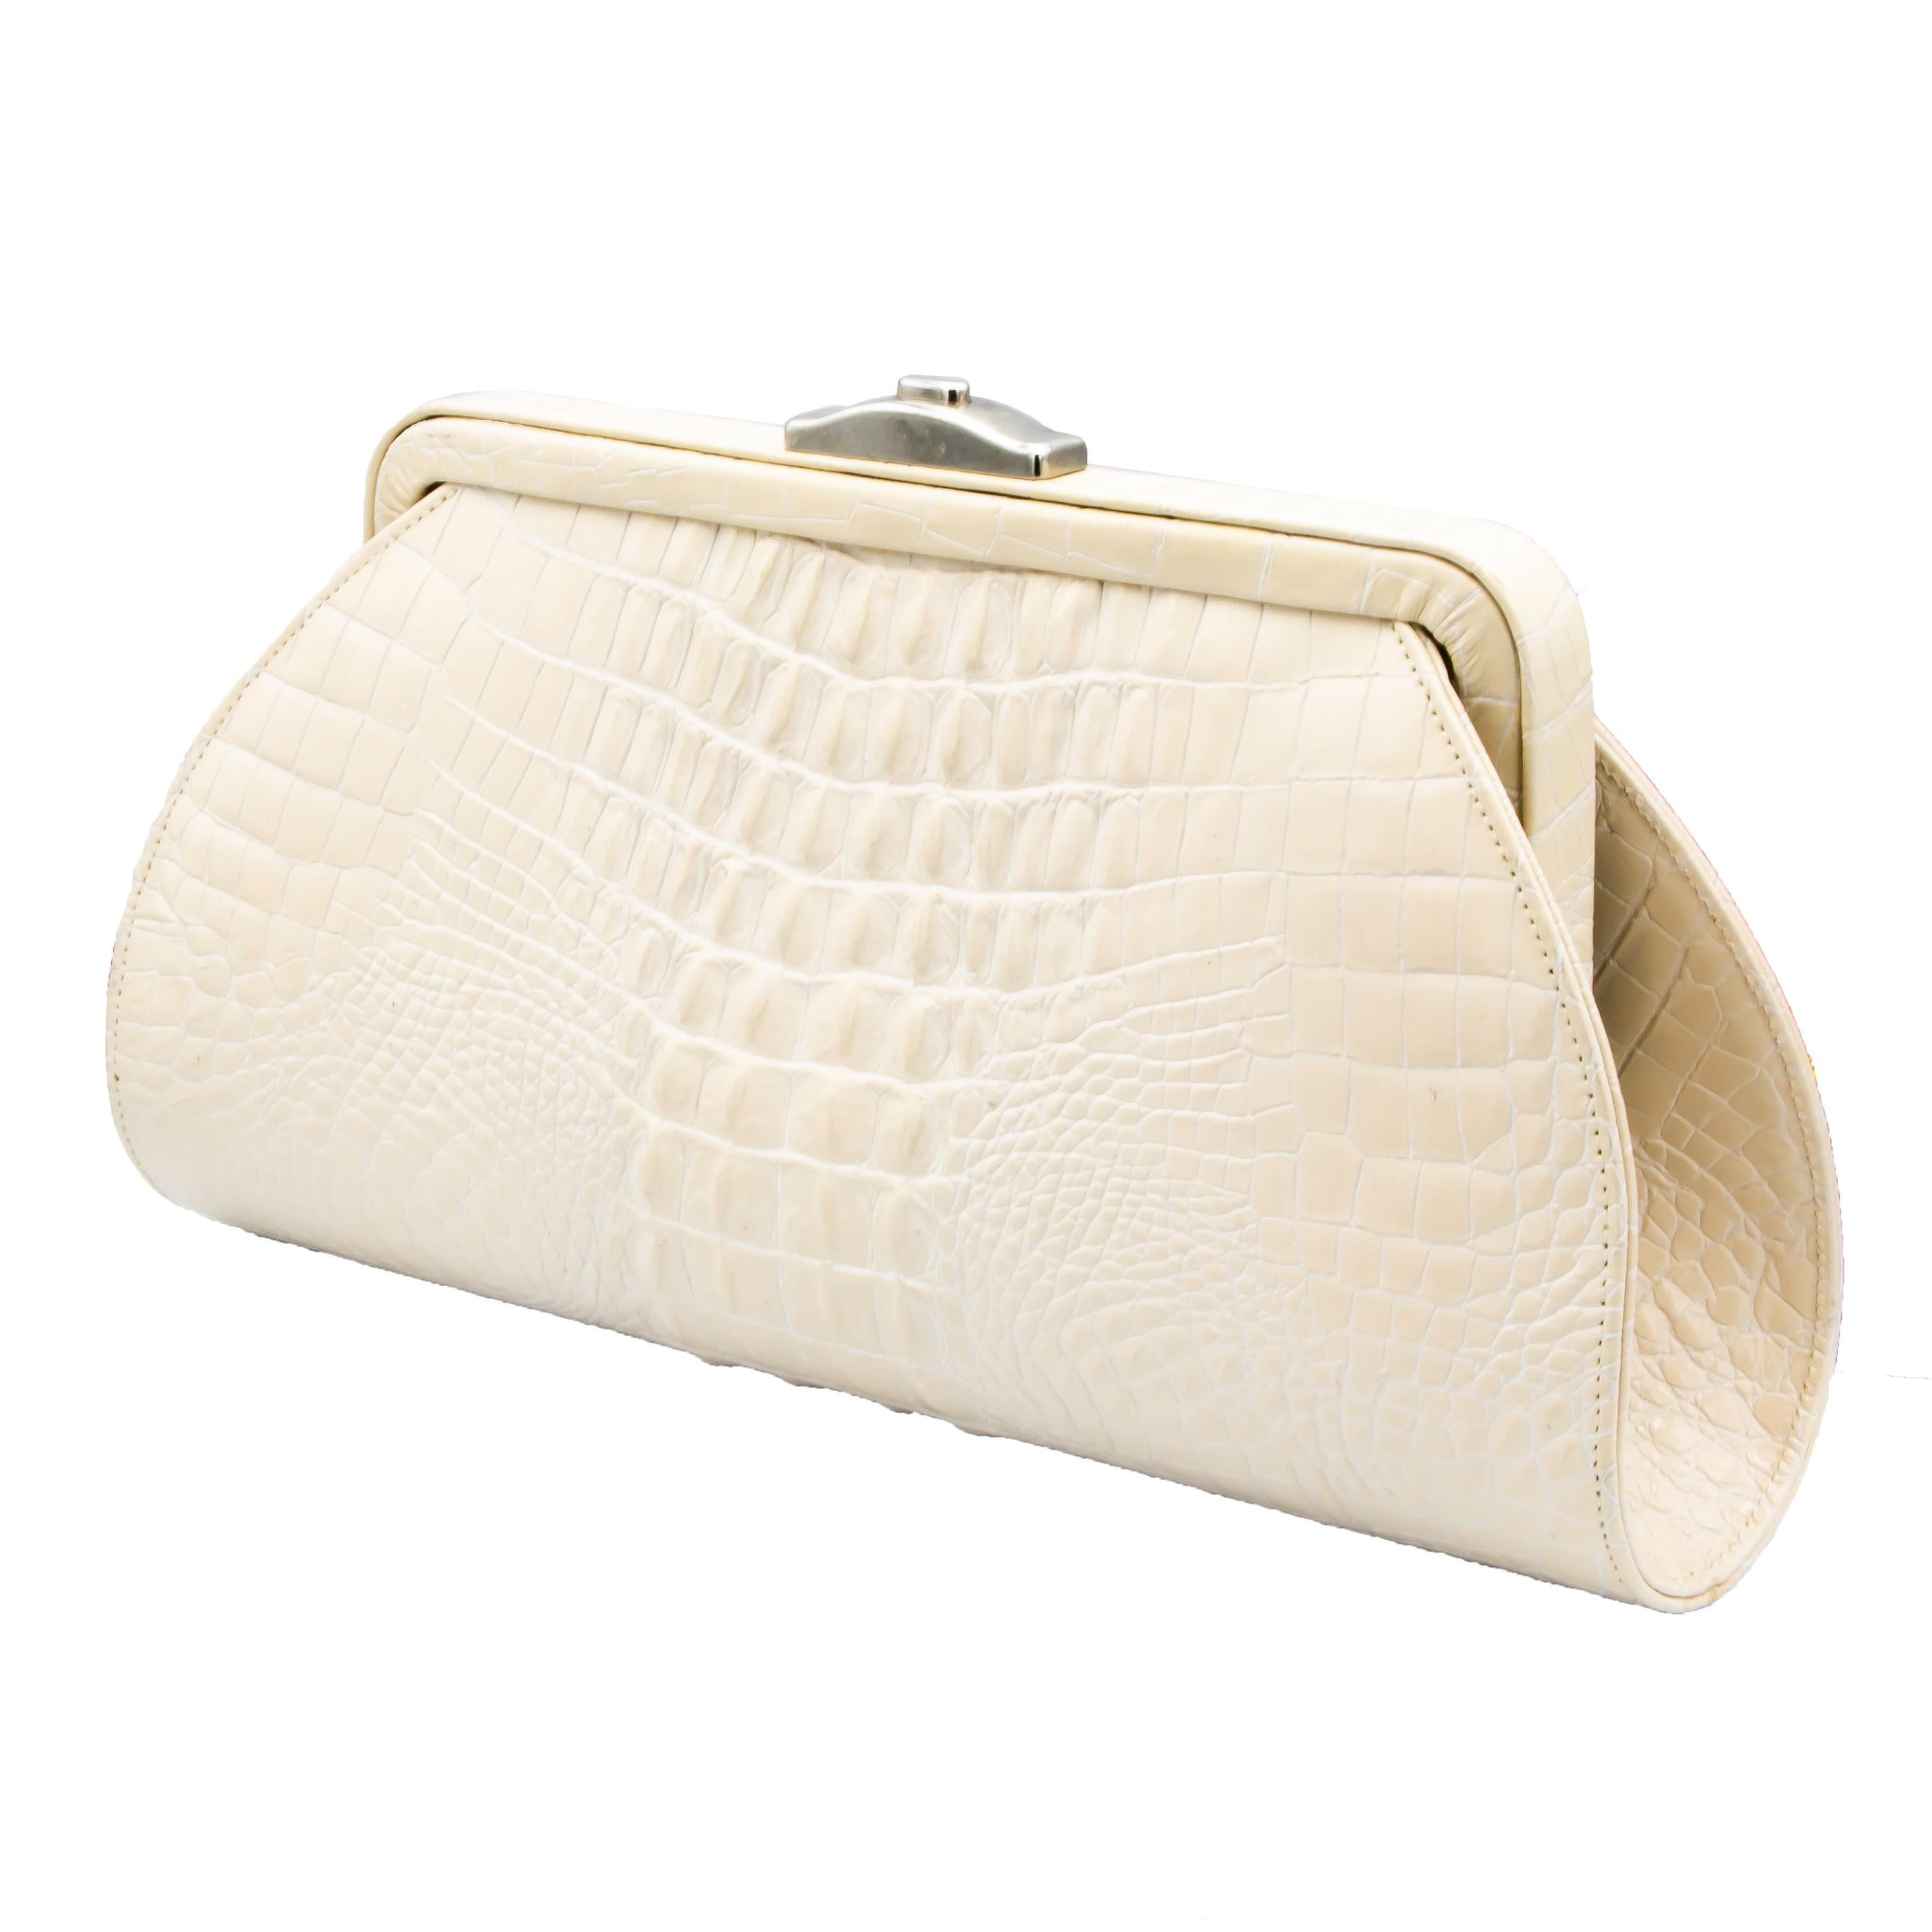 Beige Ultimo Crocodile Clutch In Excellent Condition For Sale In Carlsbad, CA